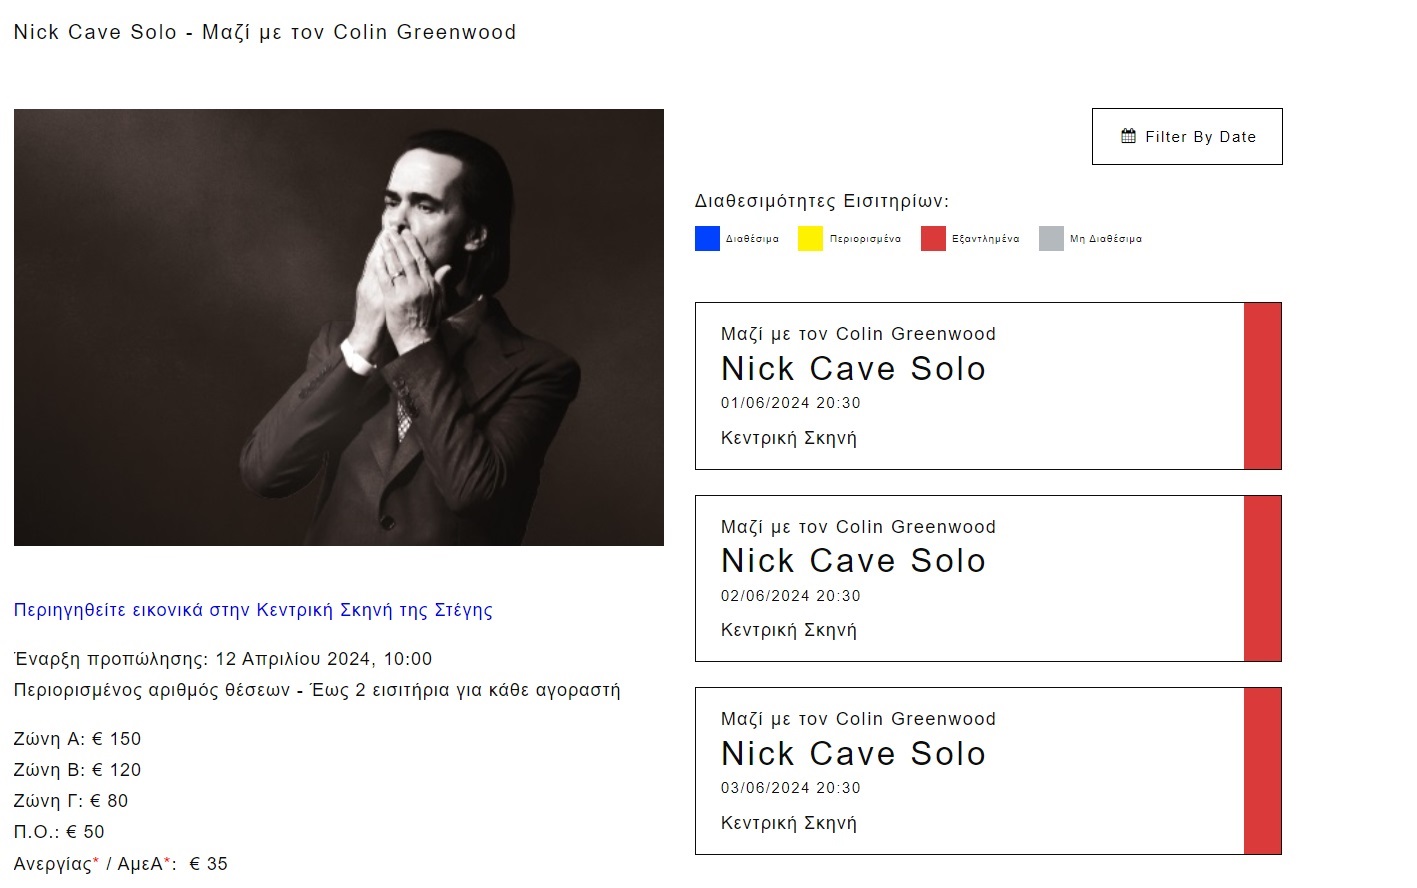 Nick Cave sold out